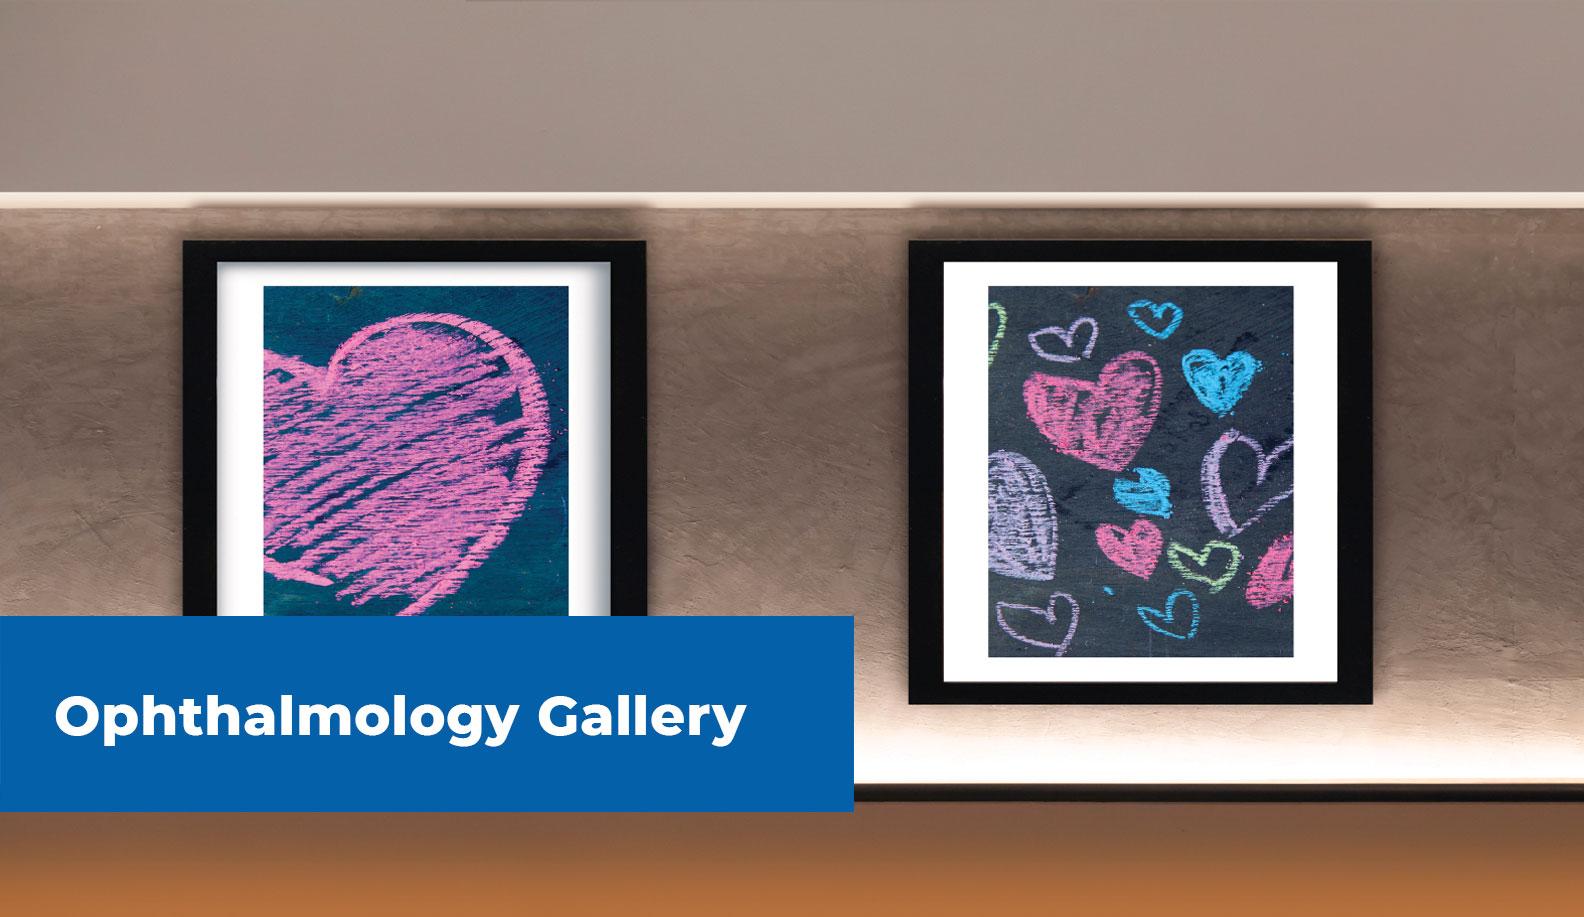 Ophthalmology Gallery